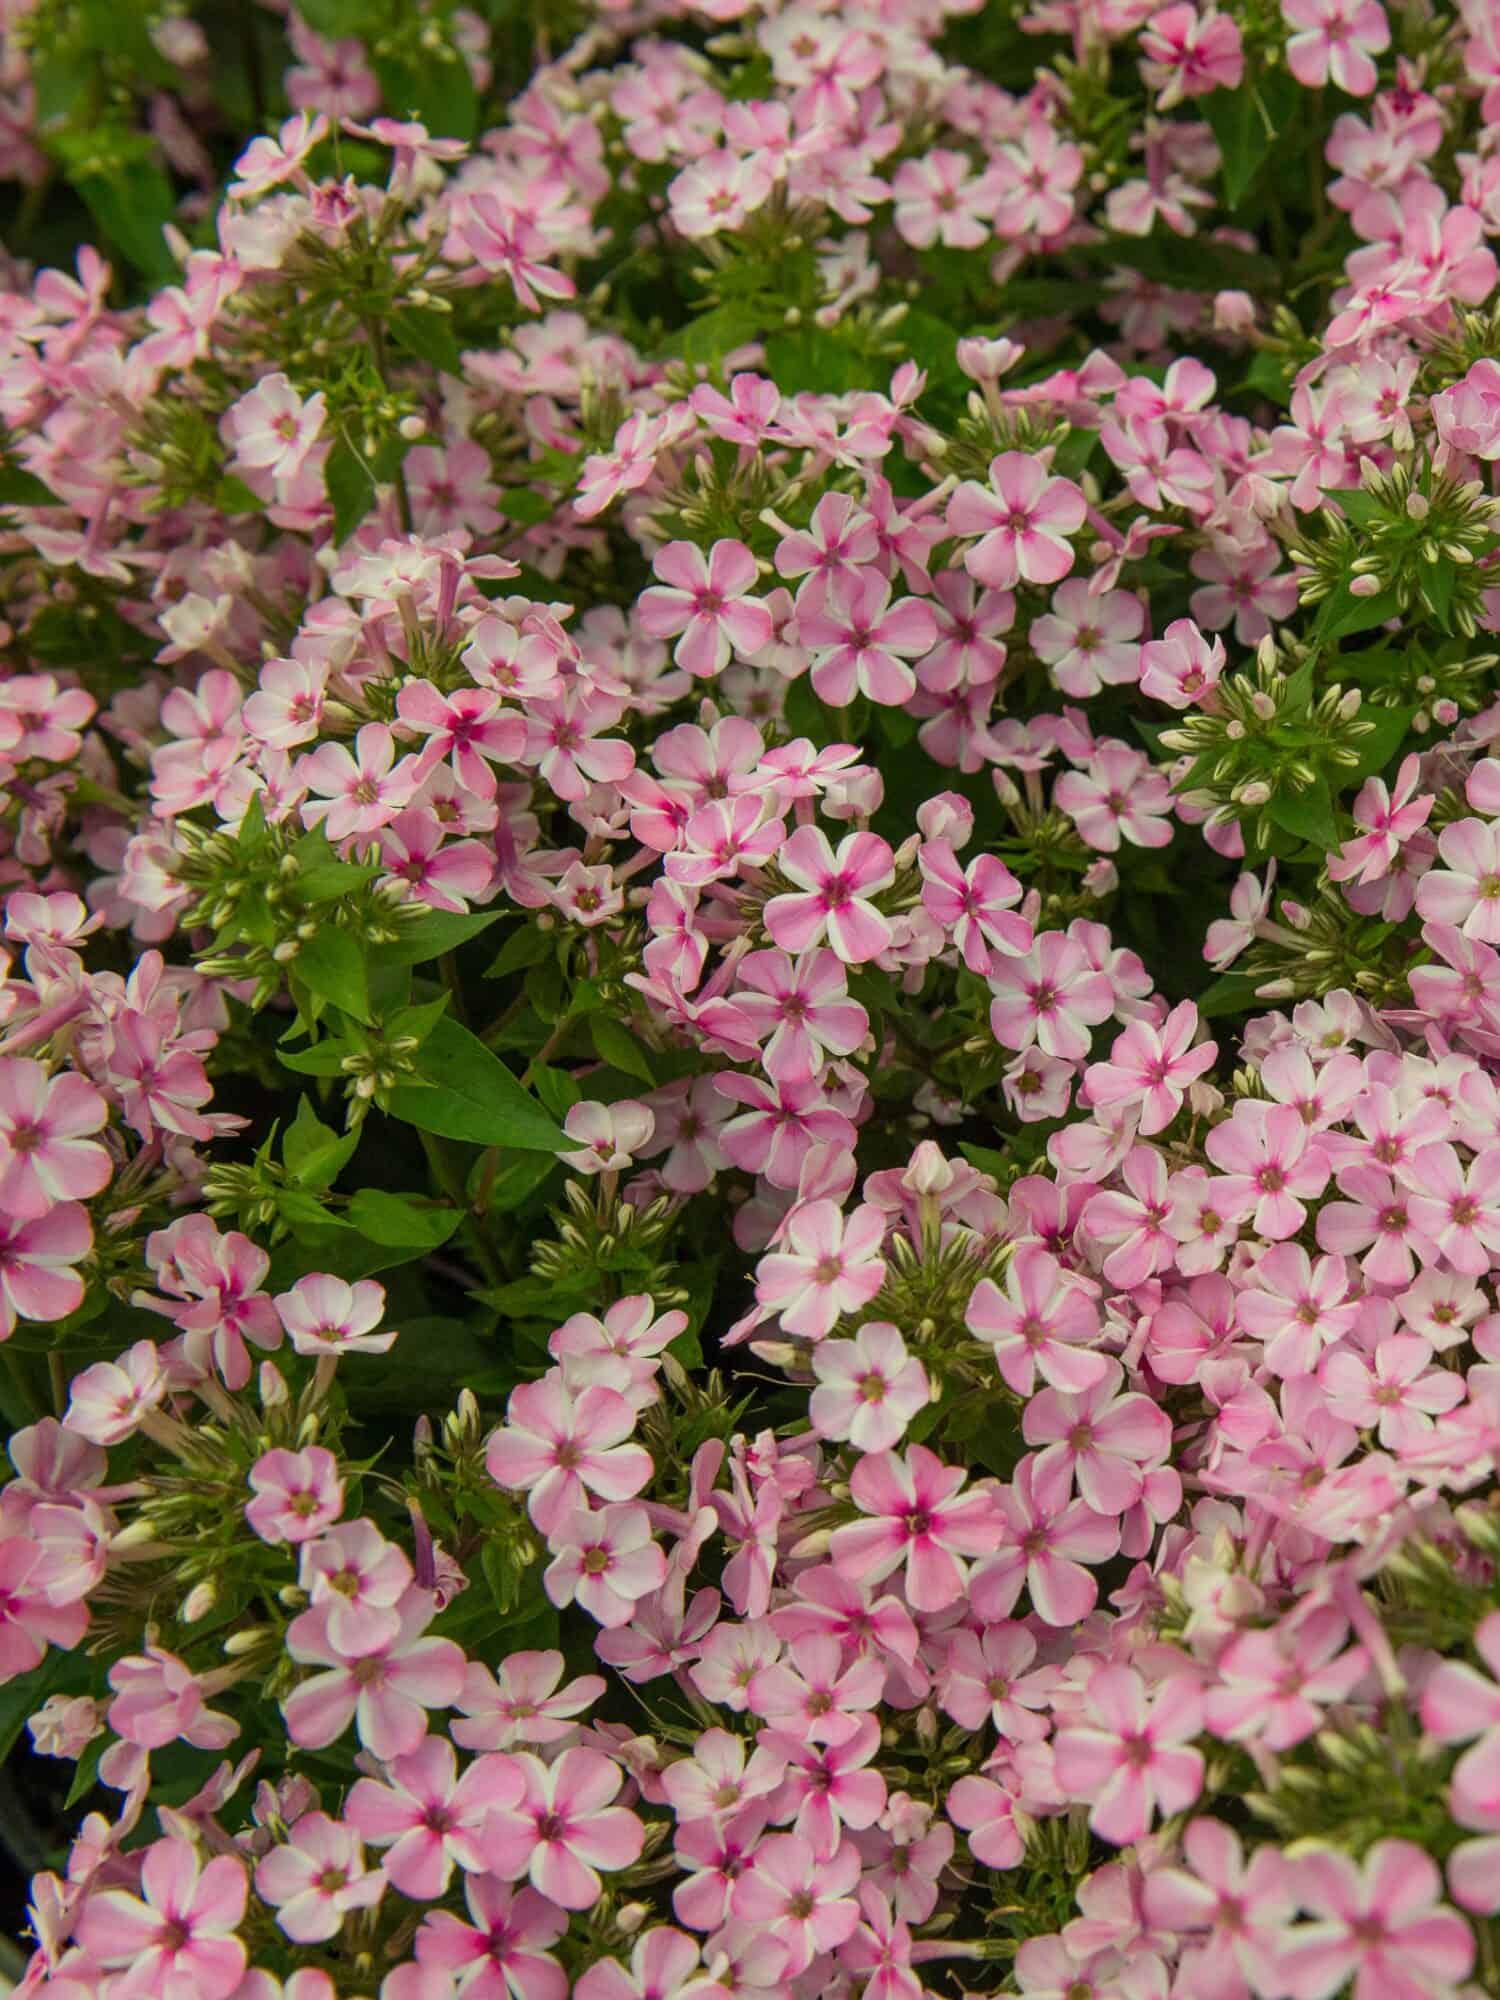 Phlox 'Early Pink Candy'